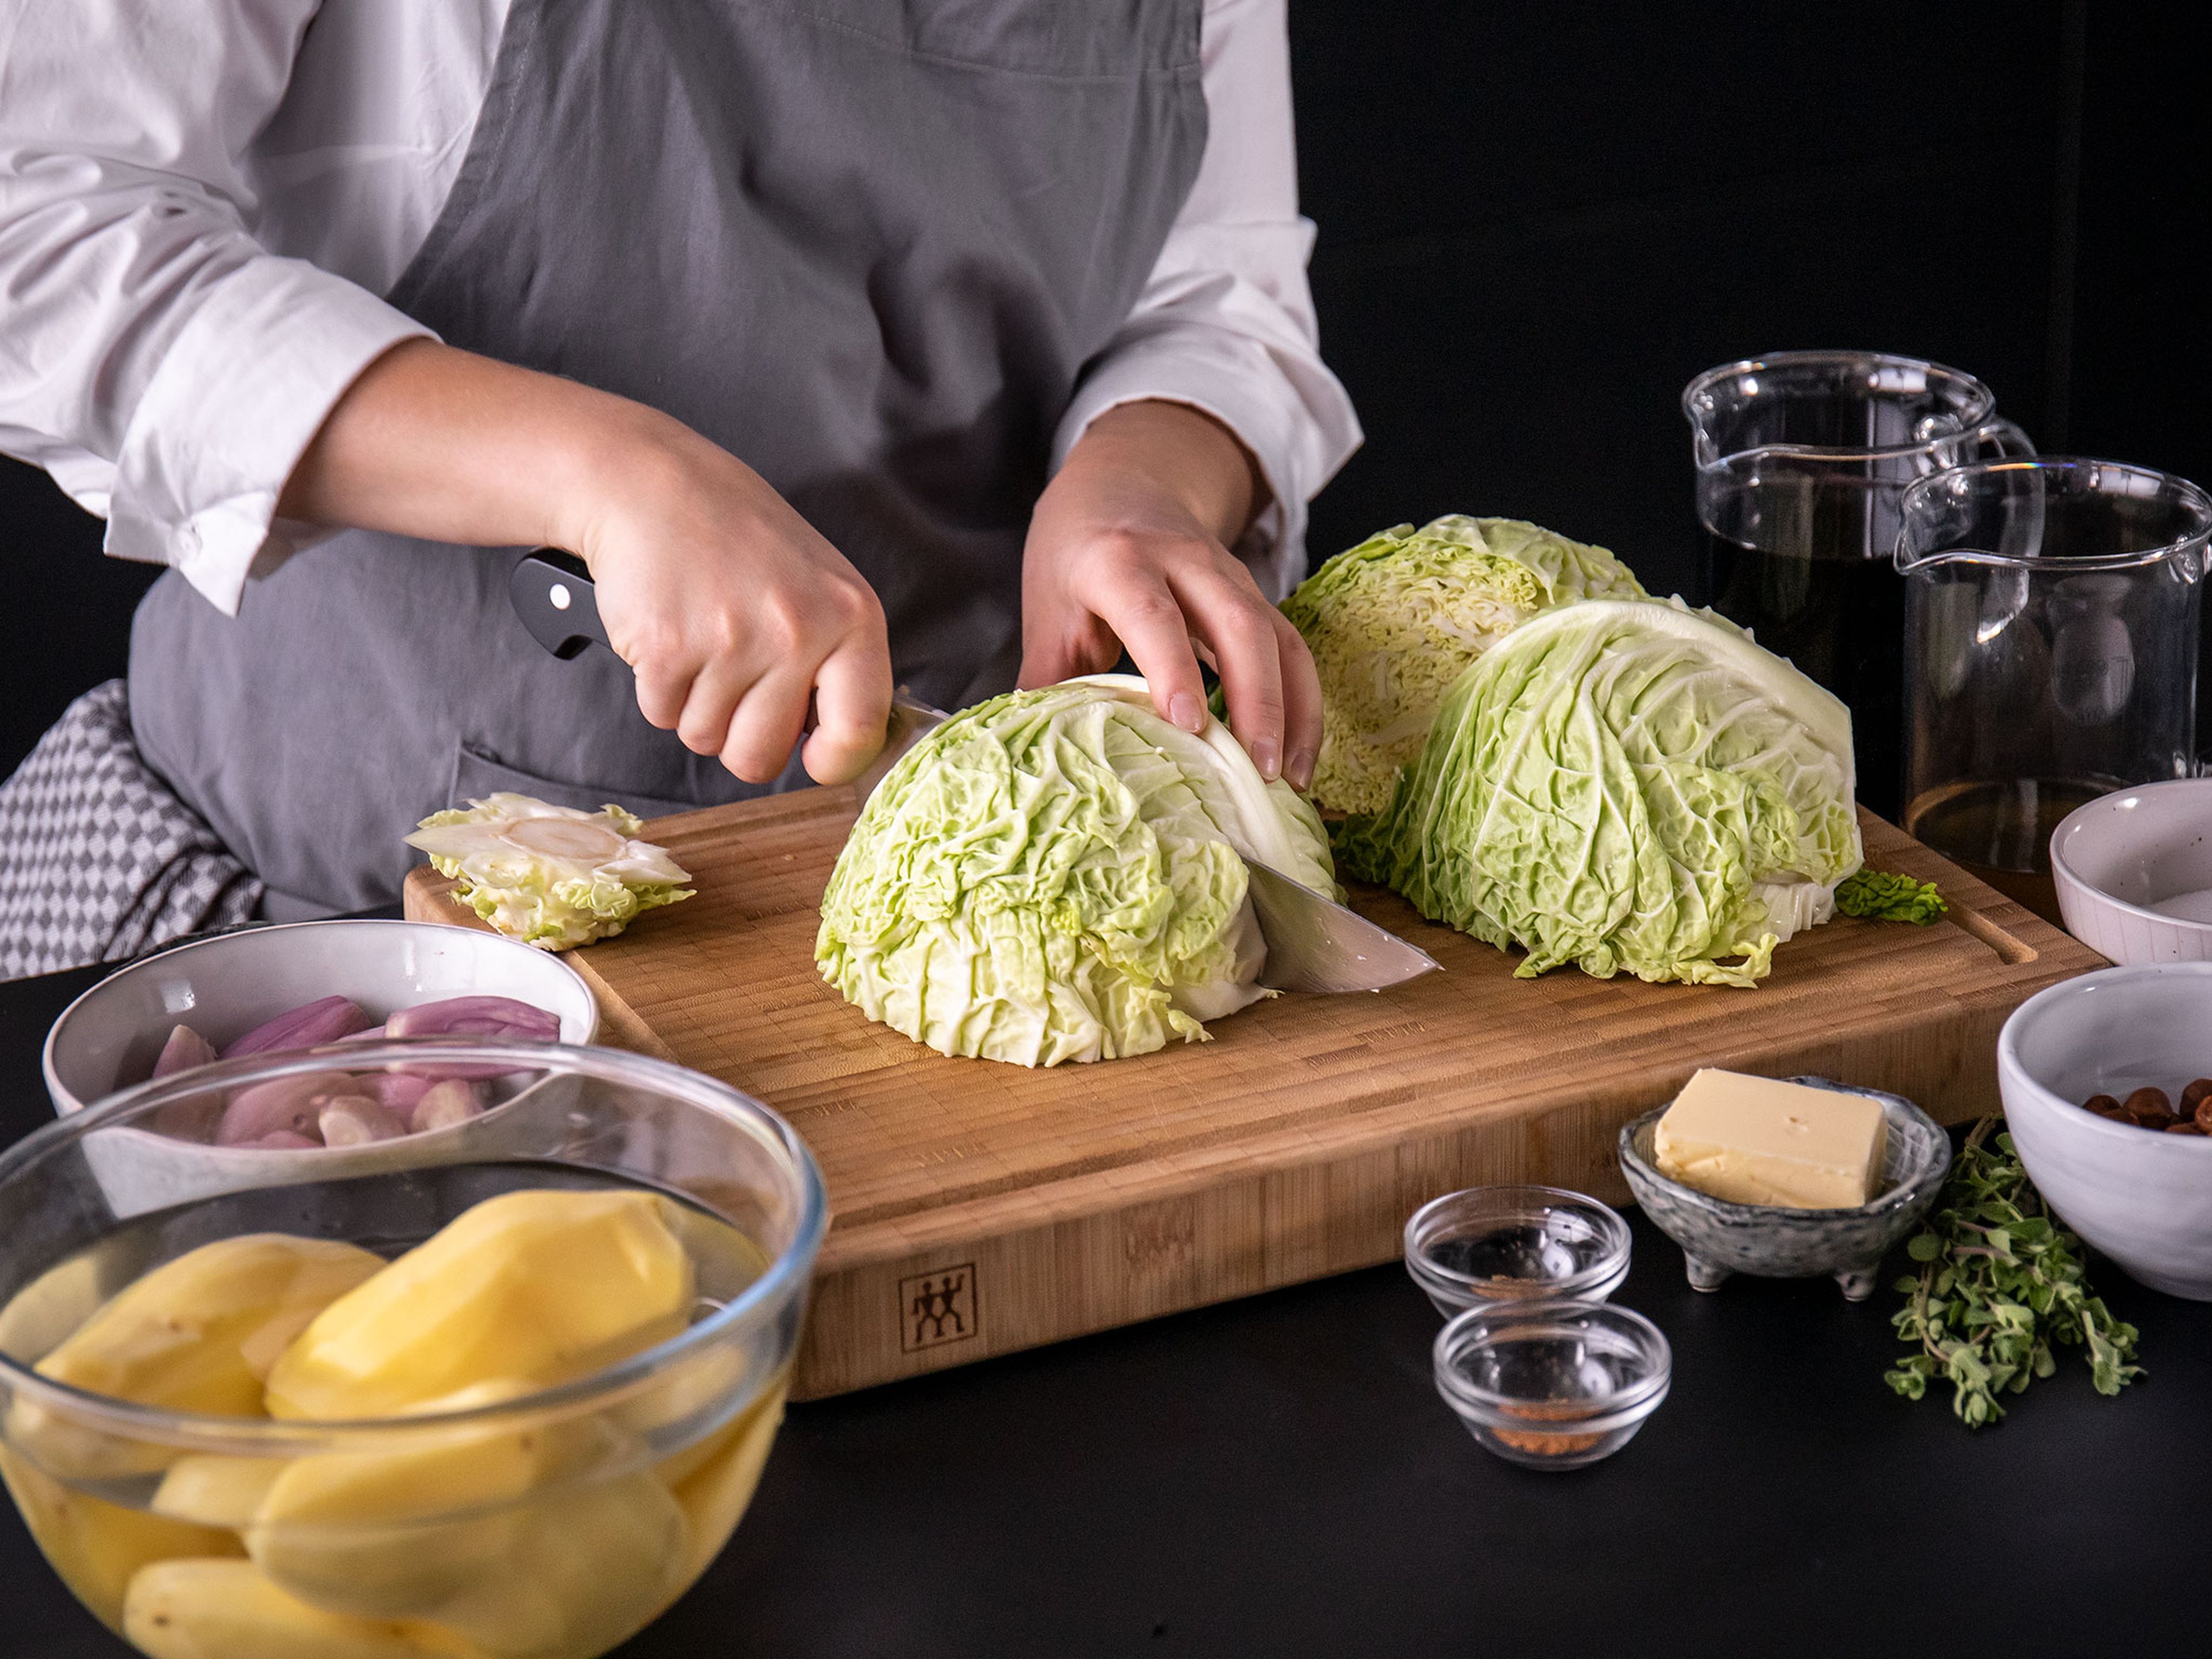 Core, quarter, and cut savoy cabbage into thin slices. Peel and dice the potatoes. Mince some shallots, and thinly slice the rest. Chop hazelnuts.